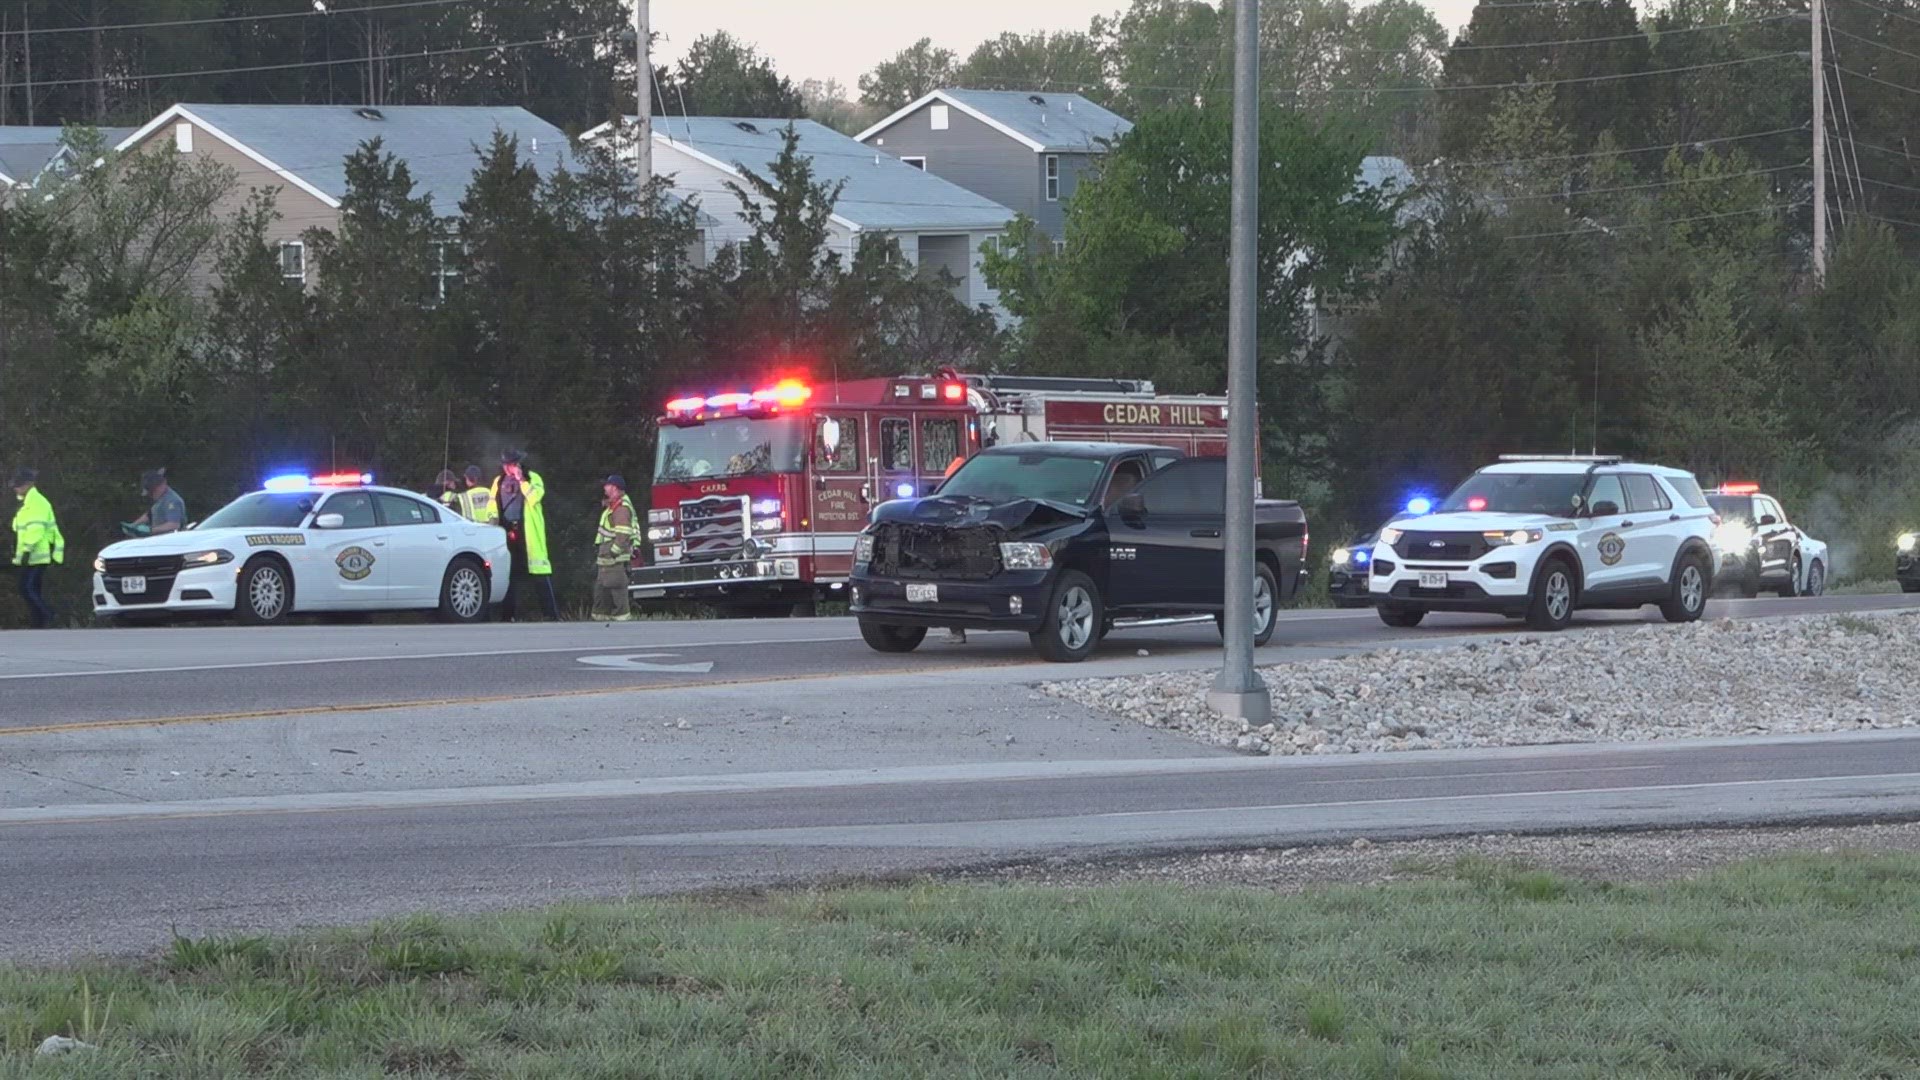 A man was struck and killed early Monday morning while standing in traffic on Missouri Route 30 in Jefferson County. All lanes have since reopened.